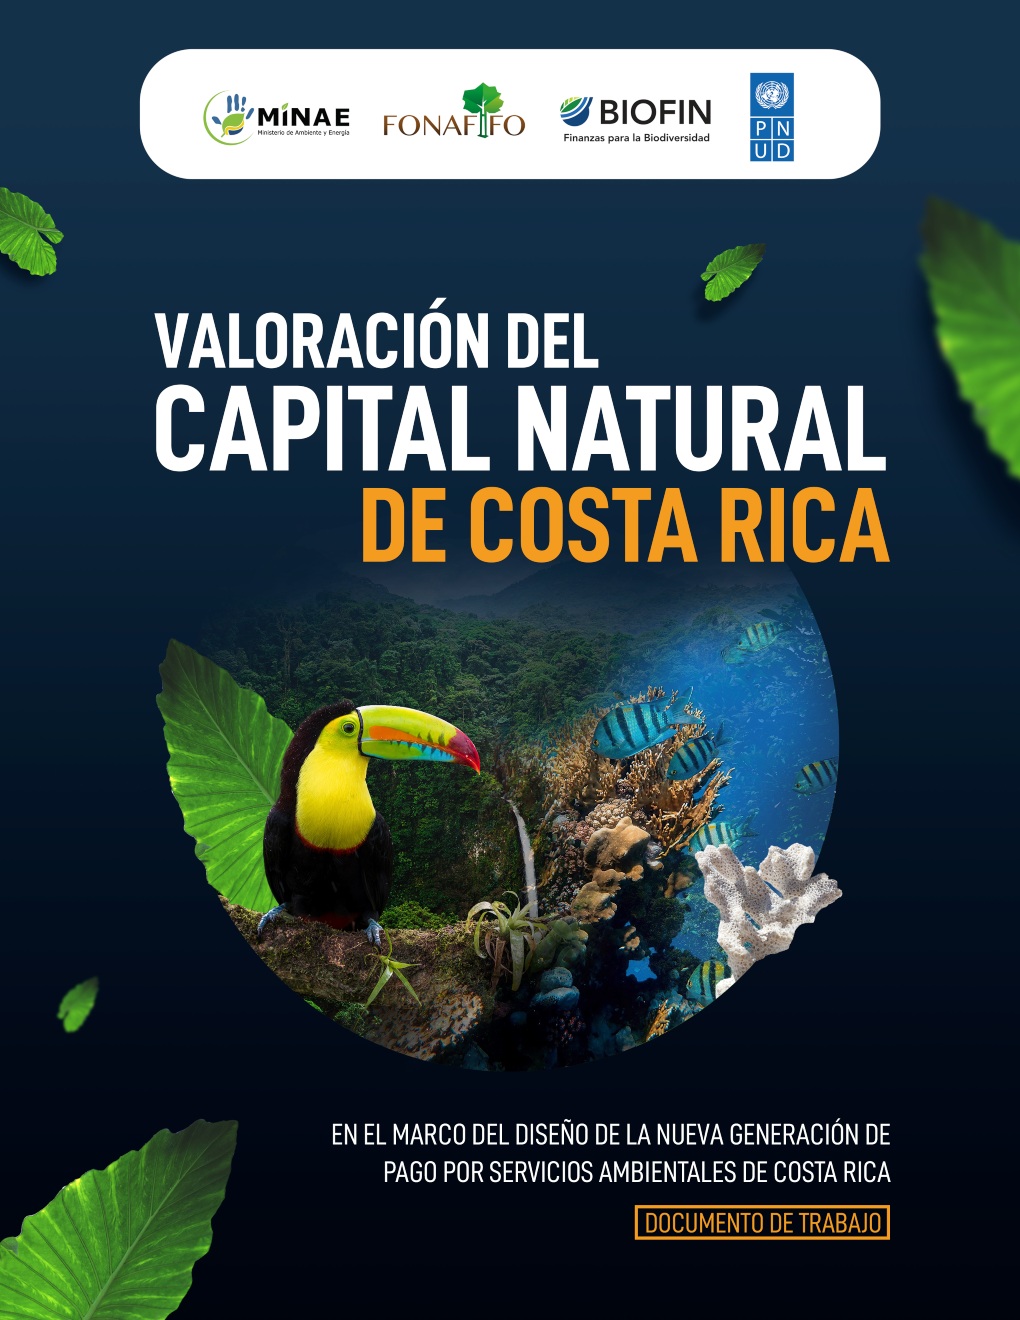 VALUATION OF THE NATURAL CAPITAL OF COSTA RICA IN THE FRAMEWORK OF THE NEW PAYMENT FOR COSTA RICA ENVIRONMENTAL  SERVICES